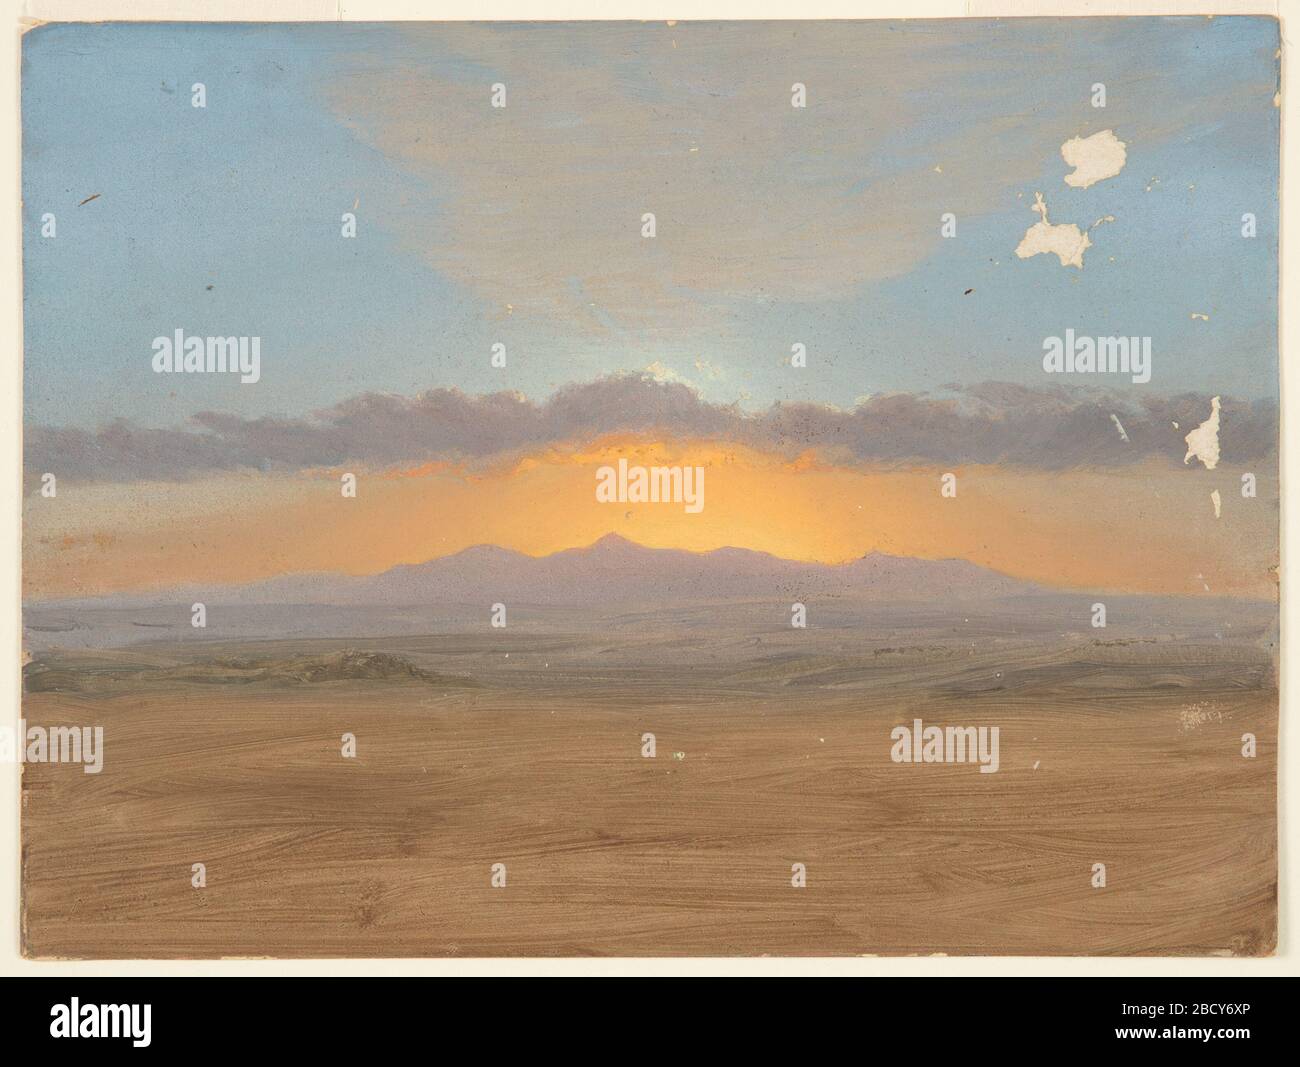 Sunset. Research in ProgressView of mountains across a plain. probably Jamaica, West Indies. Sunset Stock Photo